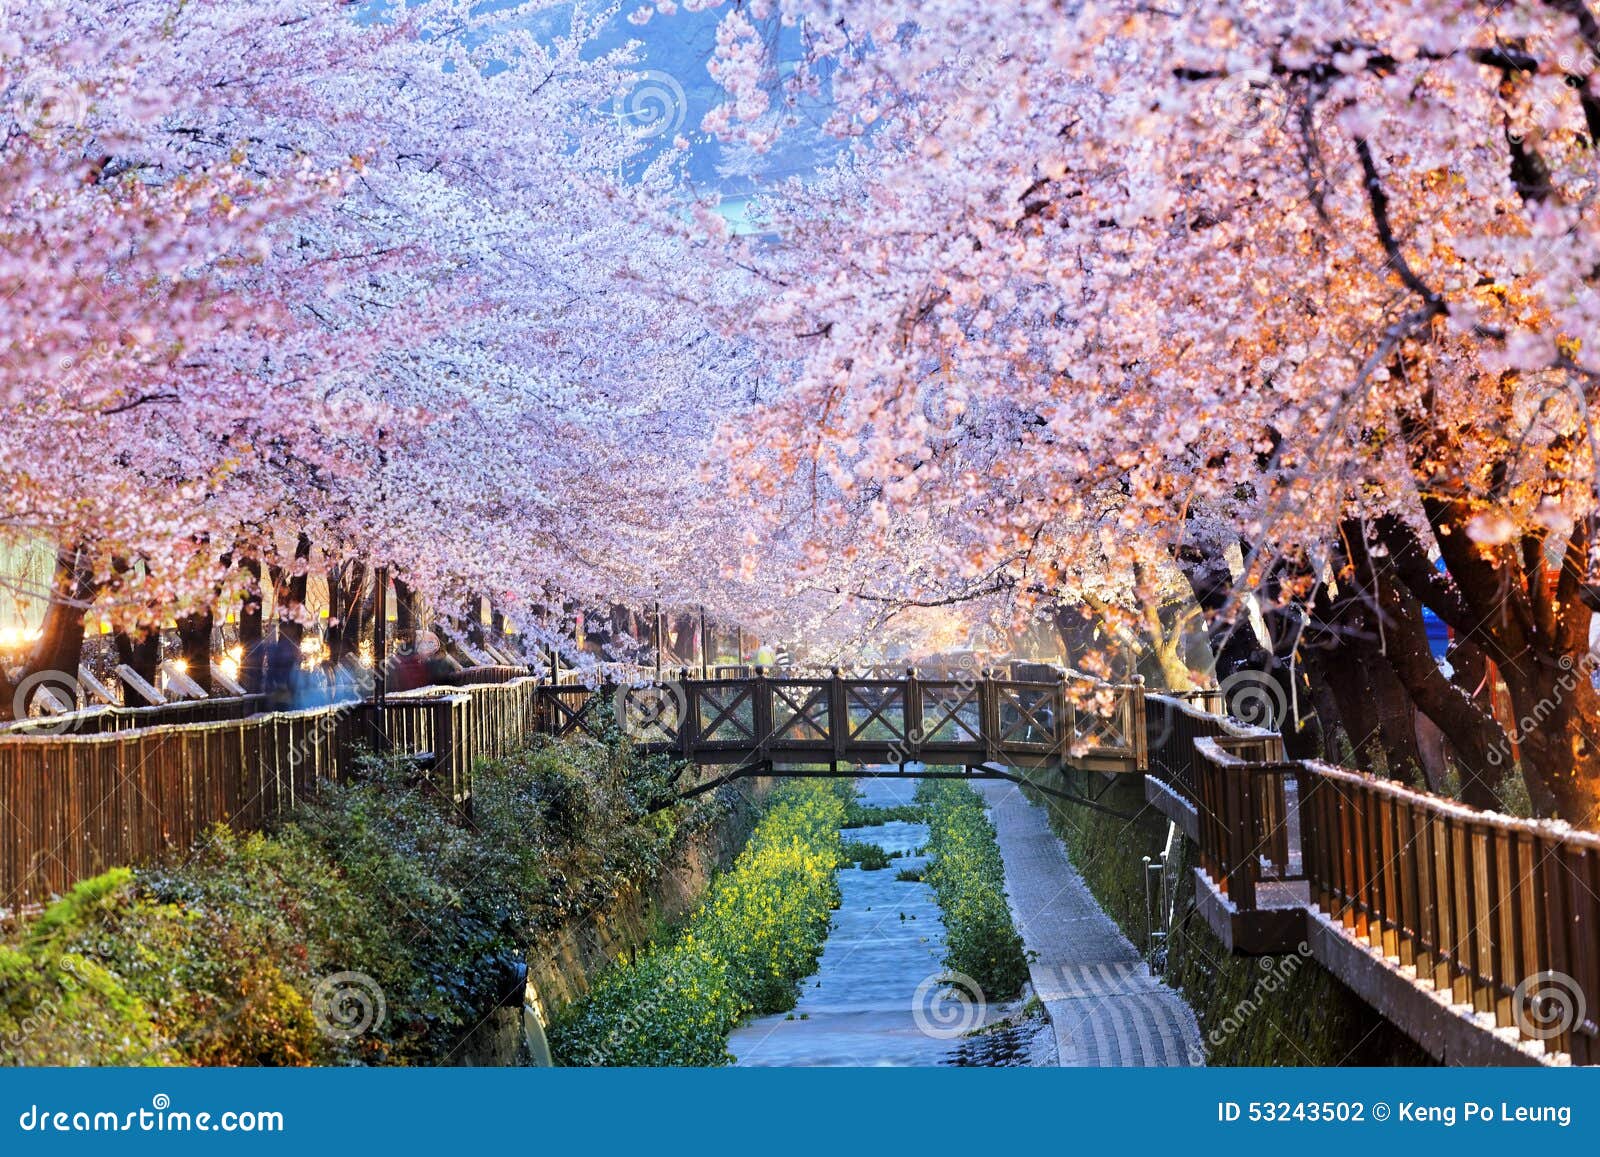 Busan City in South Korea Stock Photo - of blossom, nature: 53243502